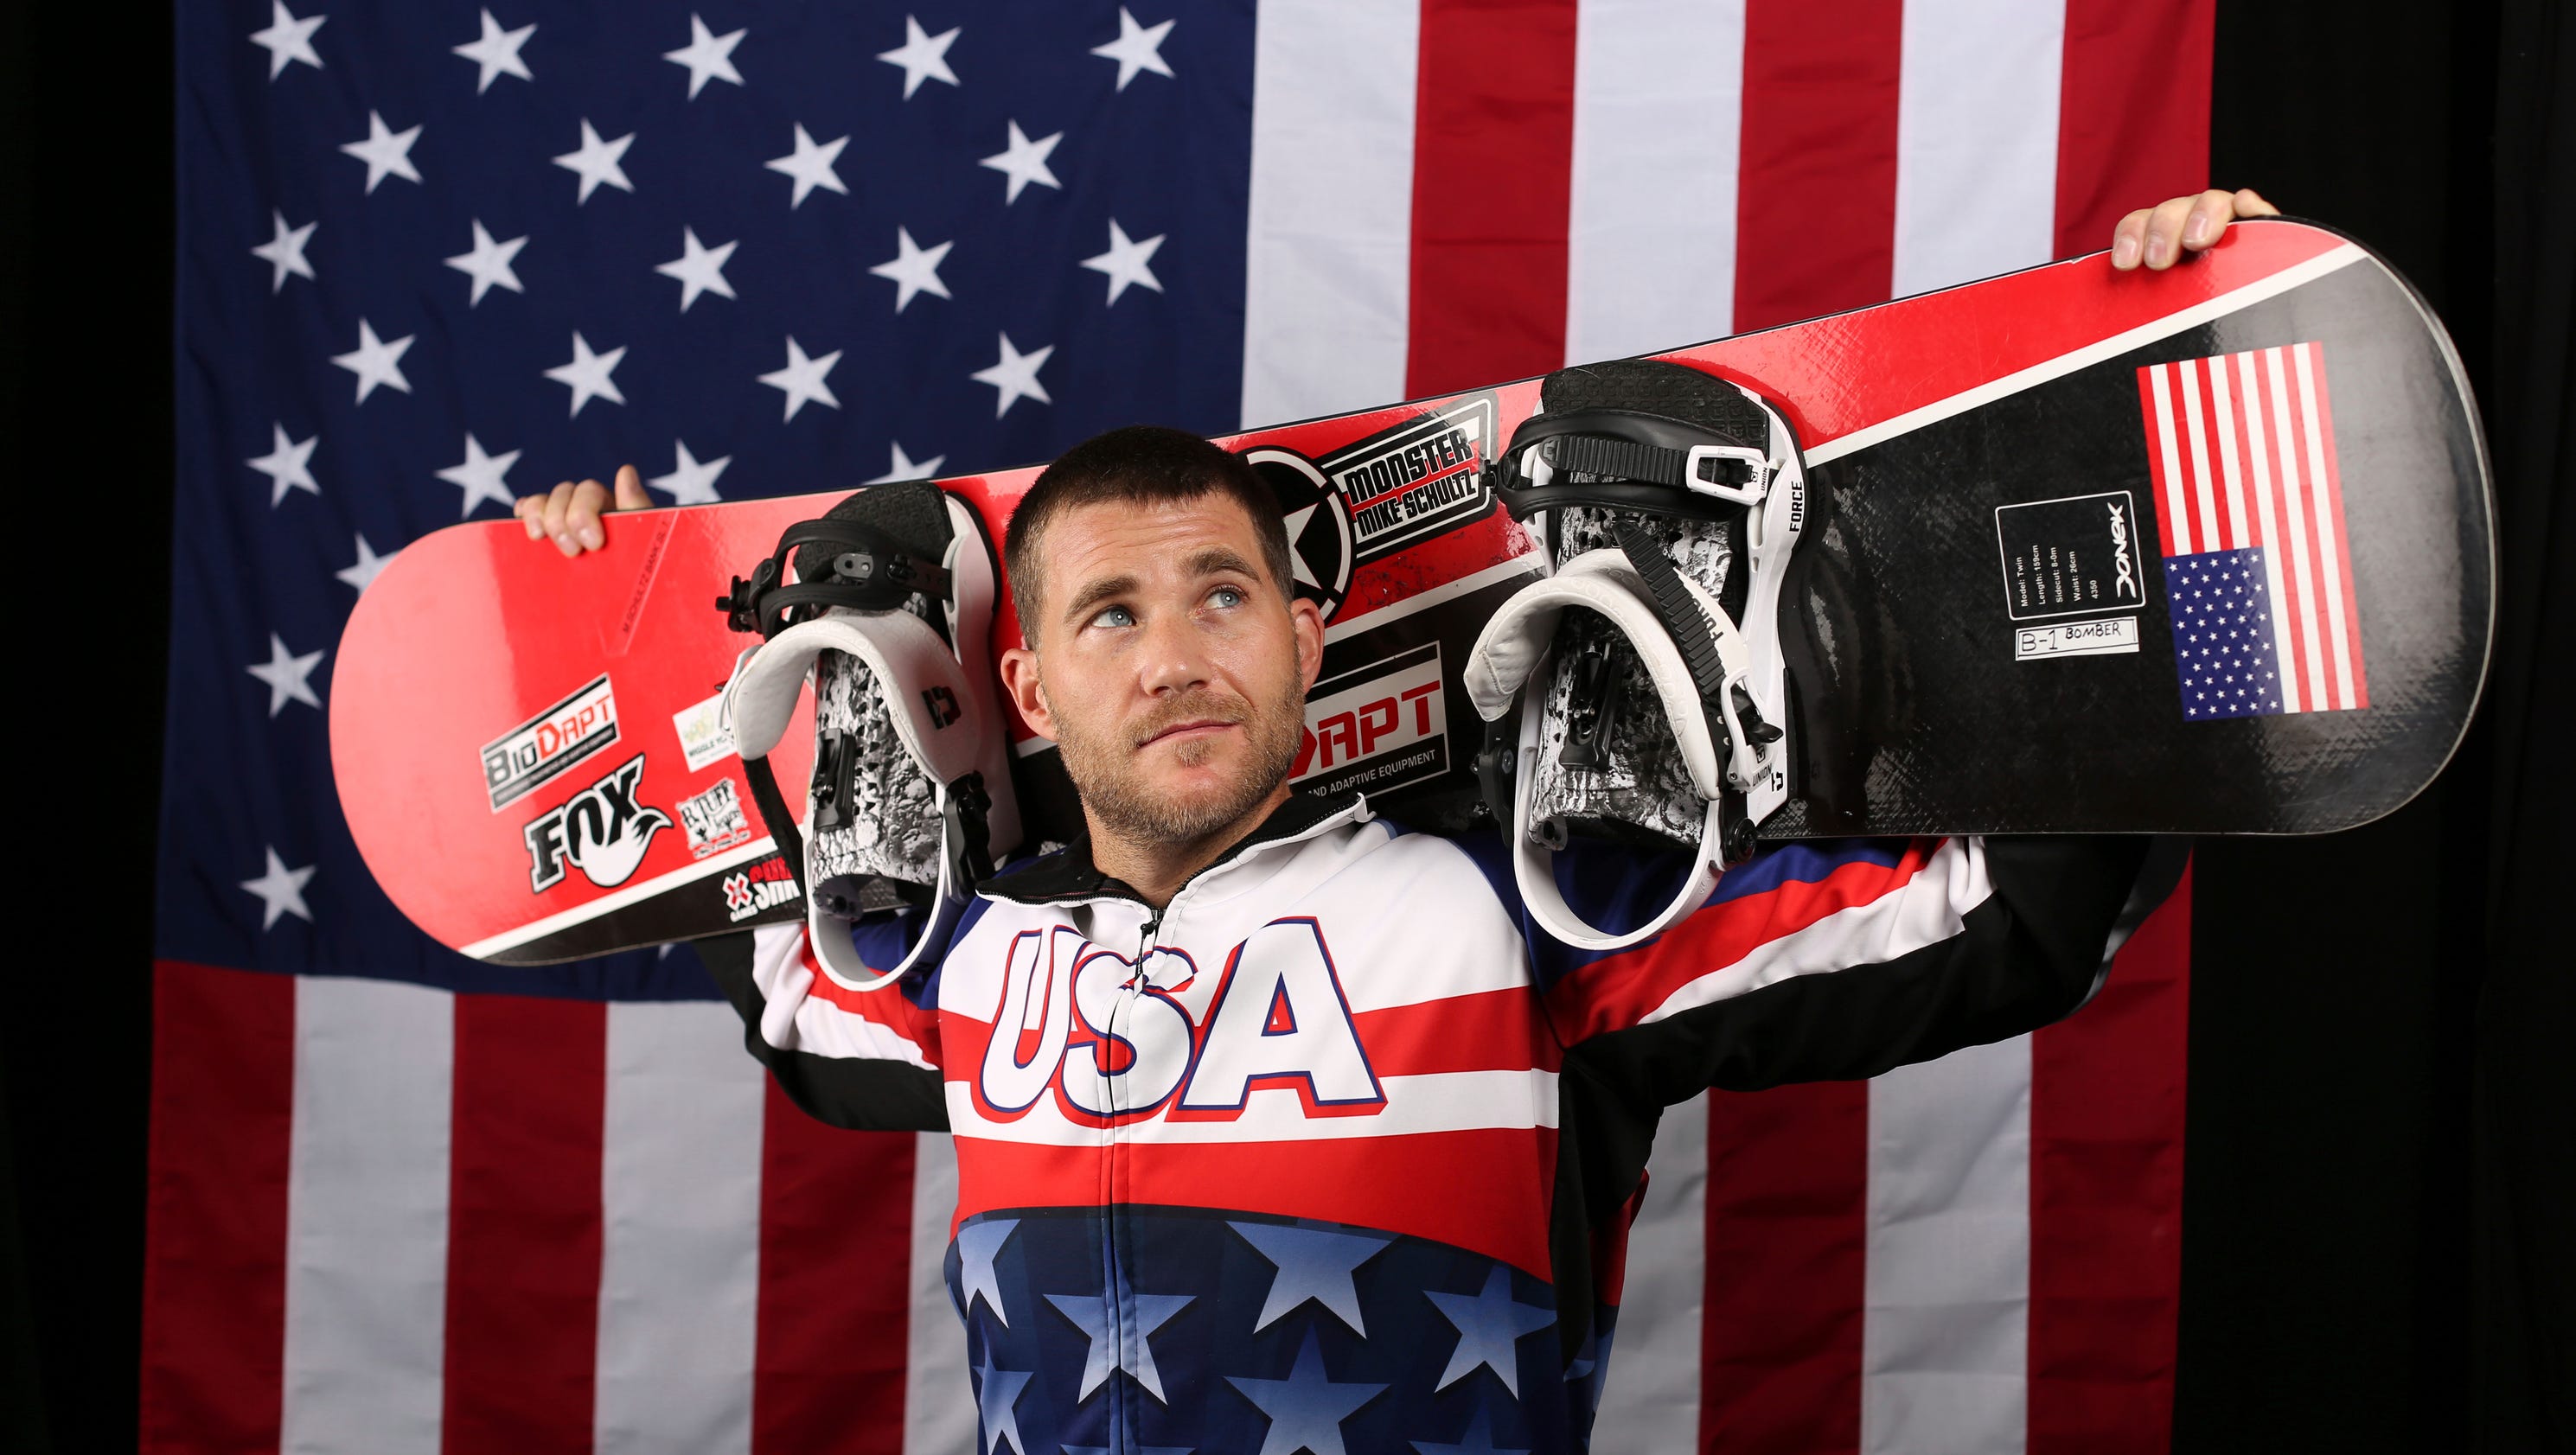 2018 Paralympics: U.S. flag bearer Mike Schultz keeps focus on his purpose in sport